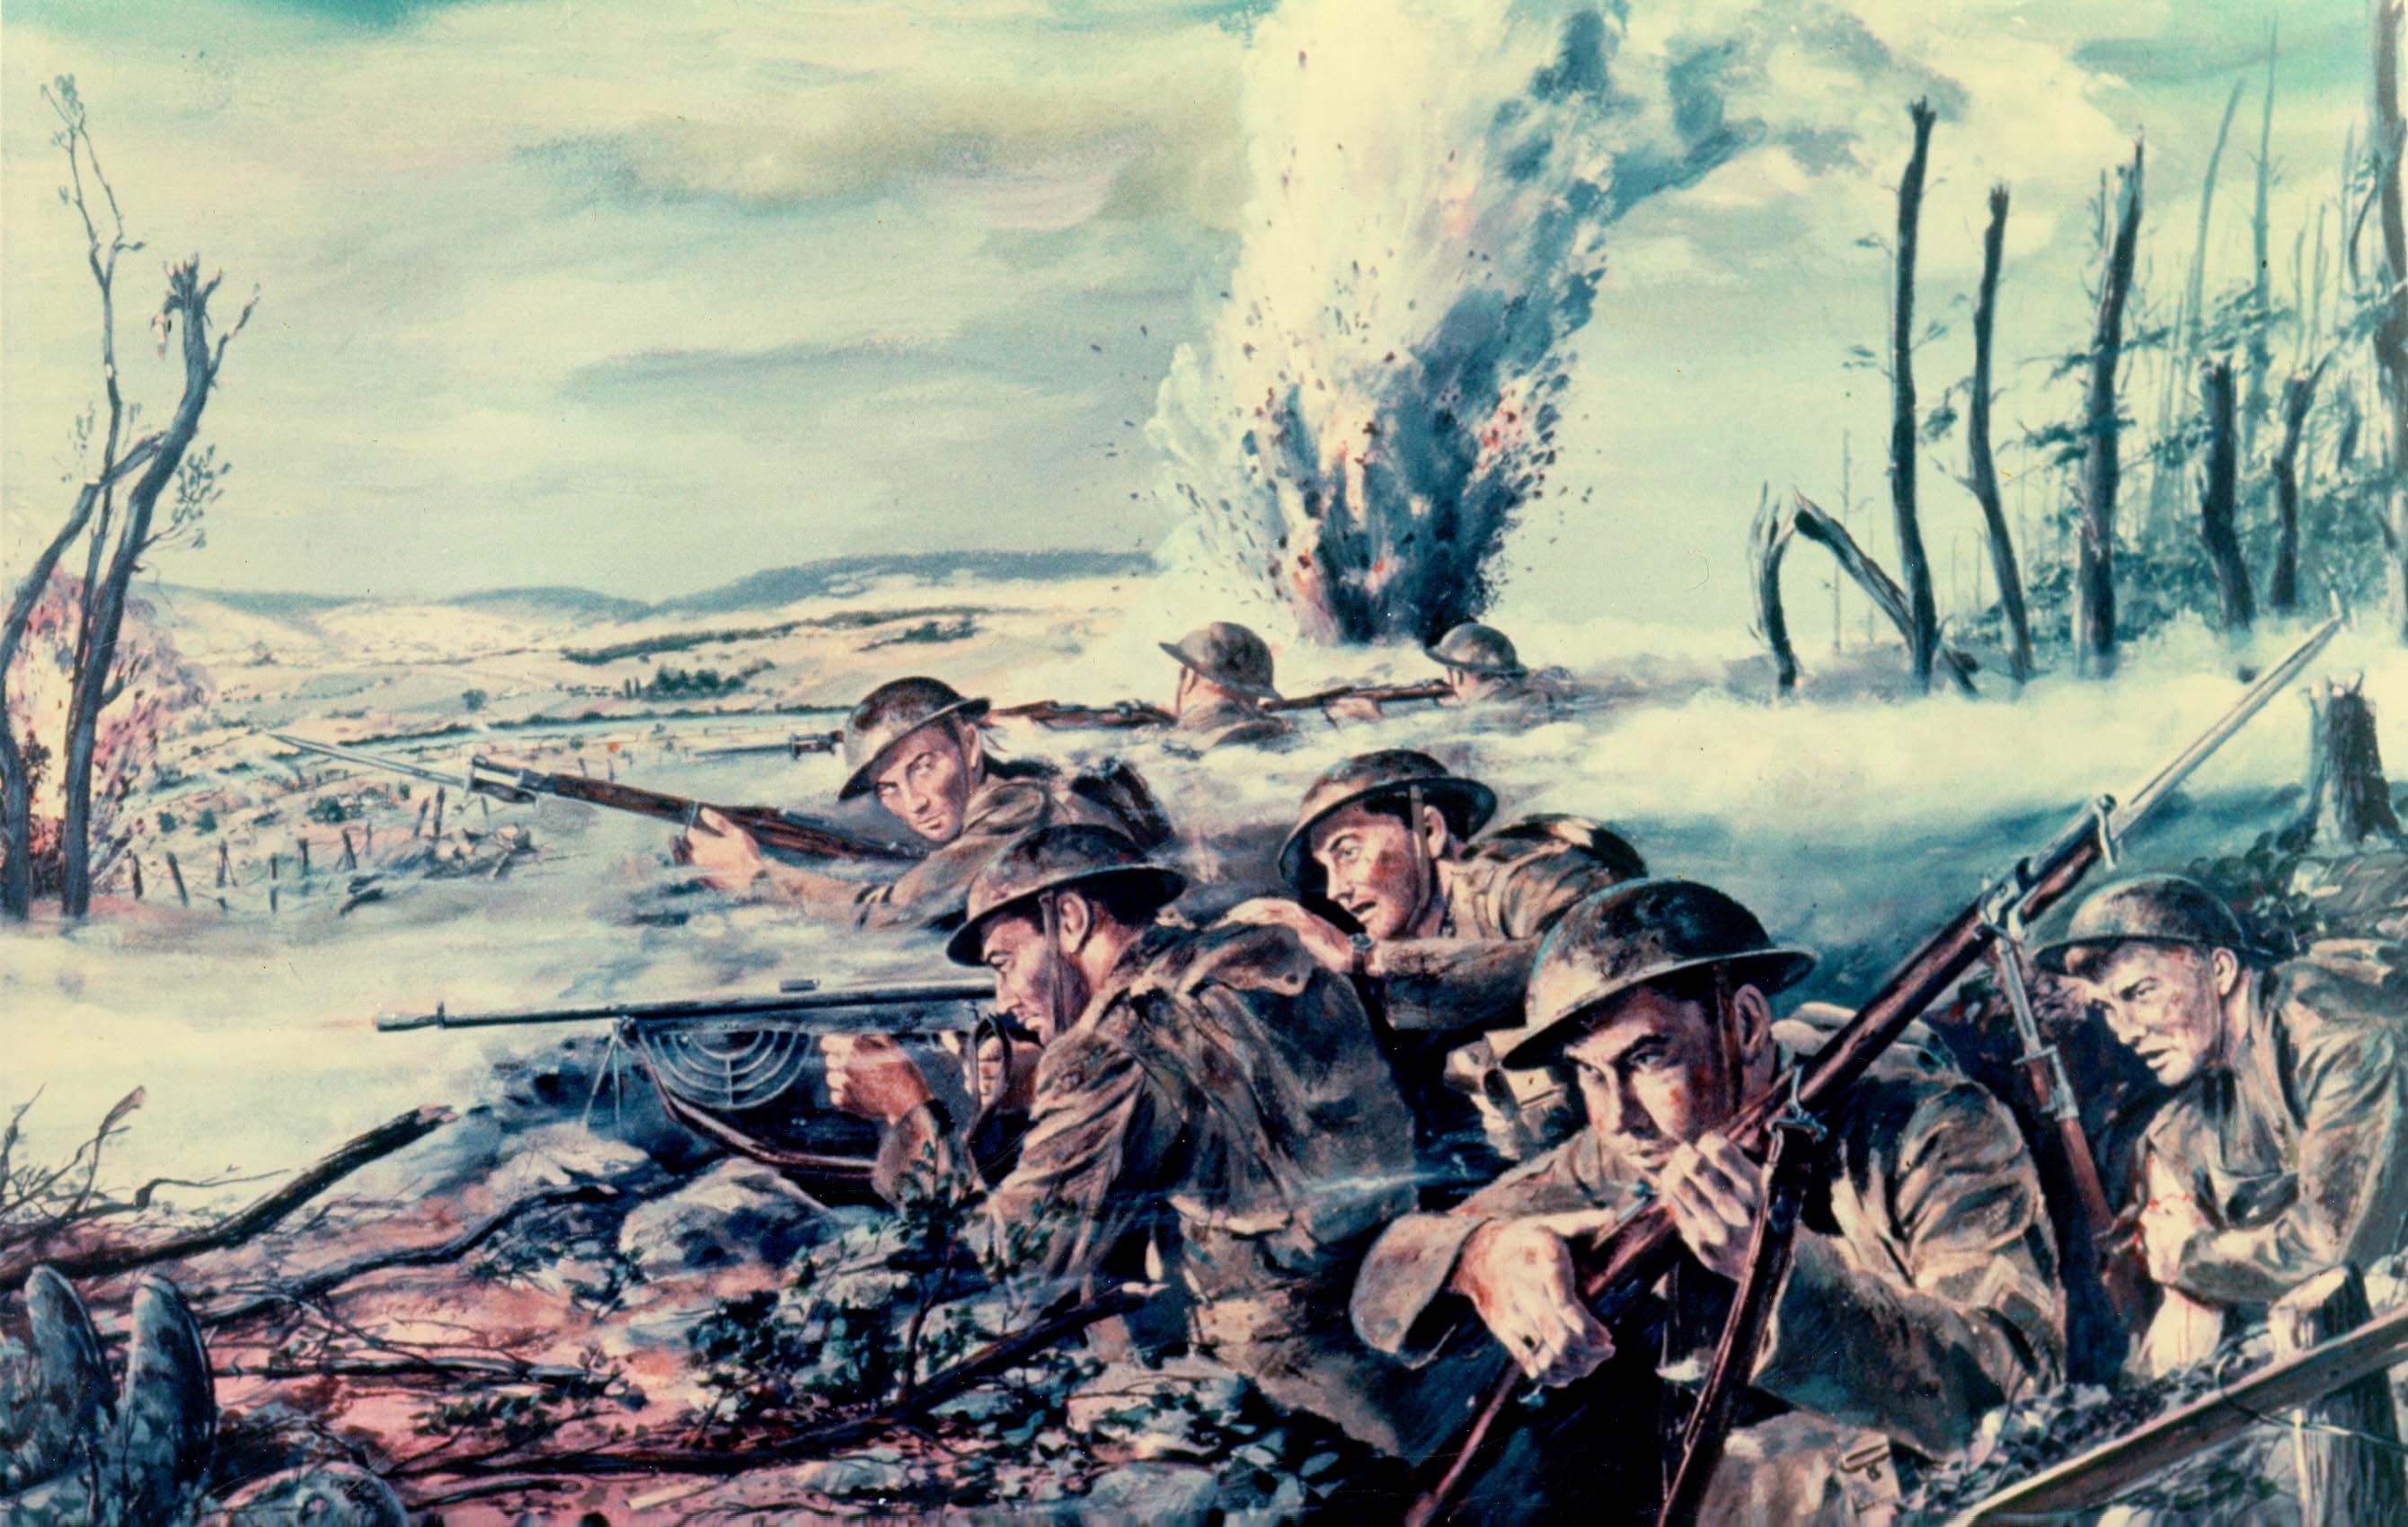 US Army to Spend $600K on World War I Art